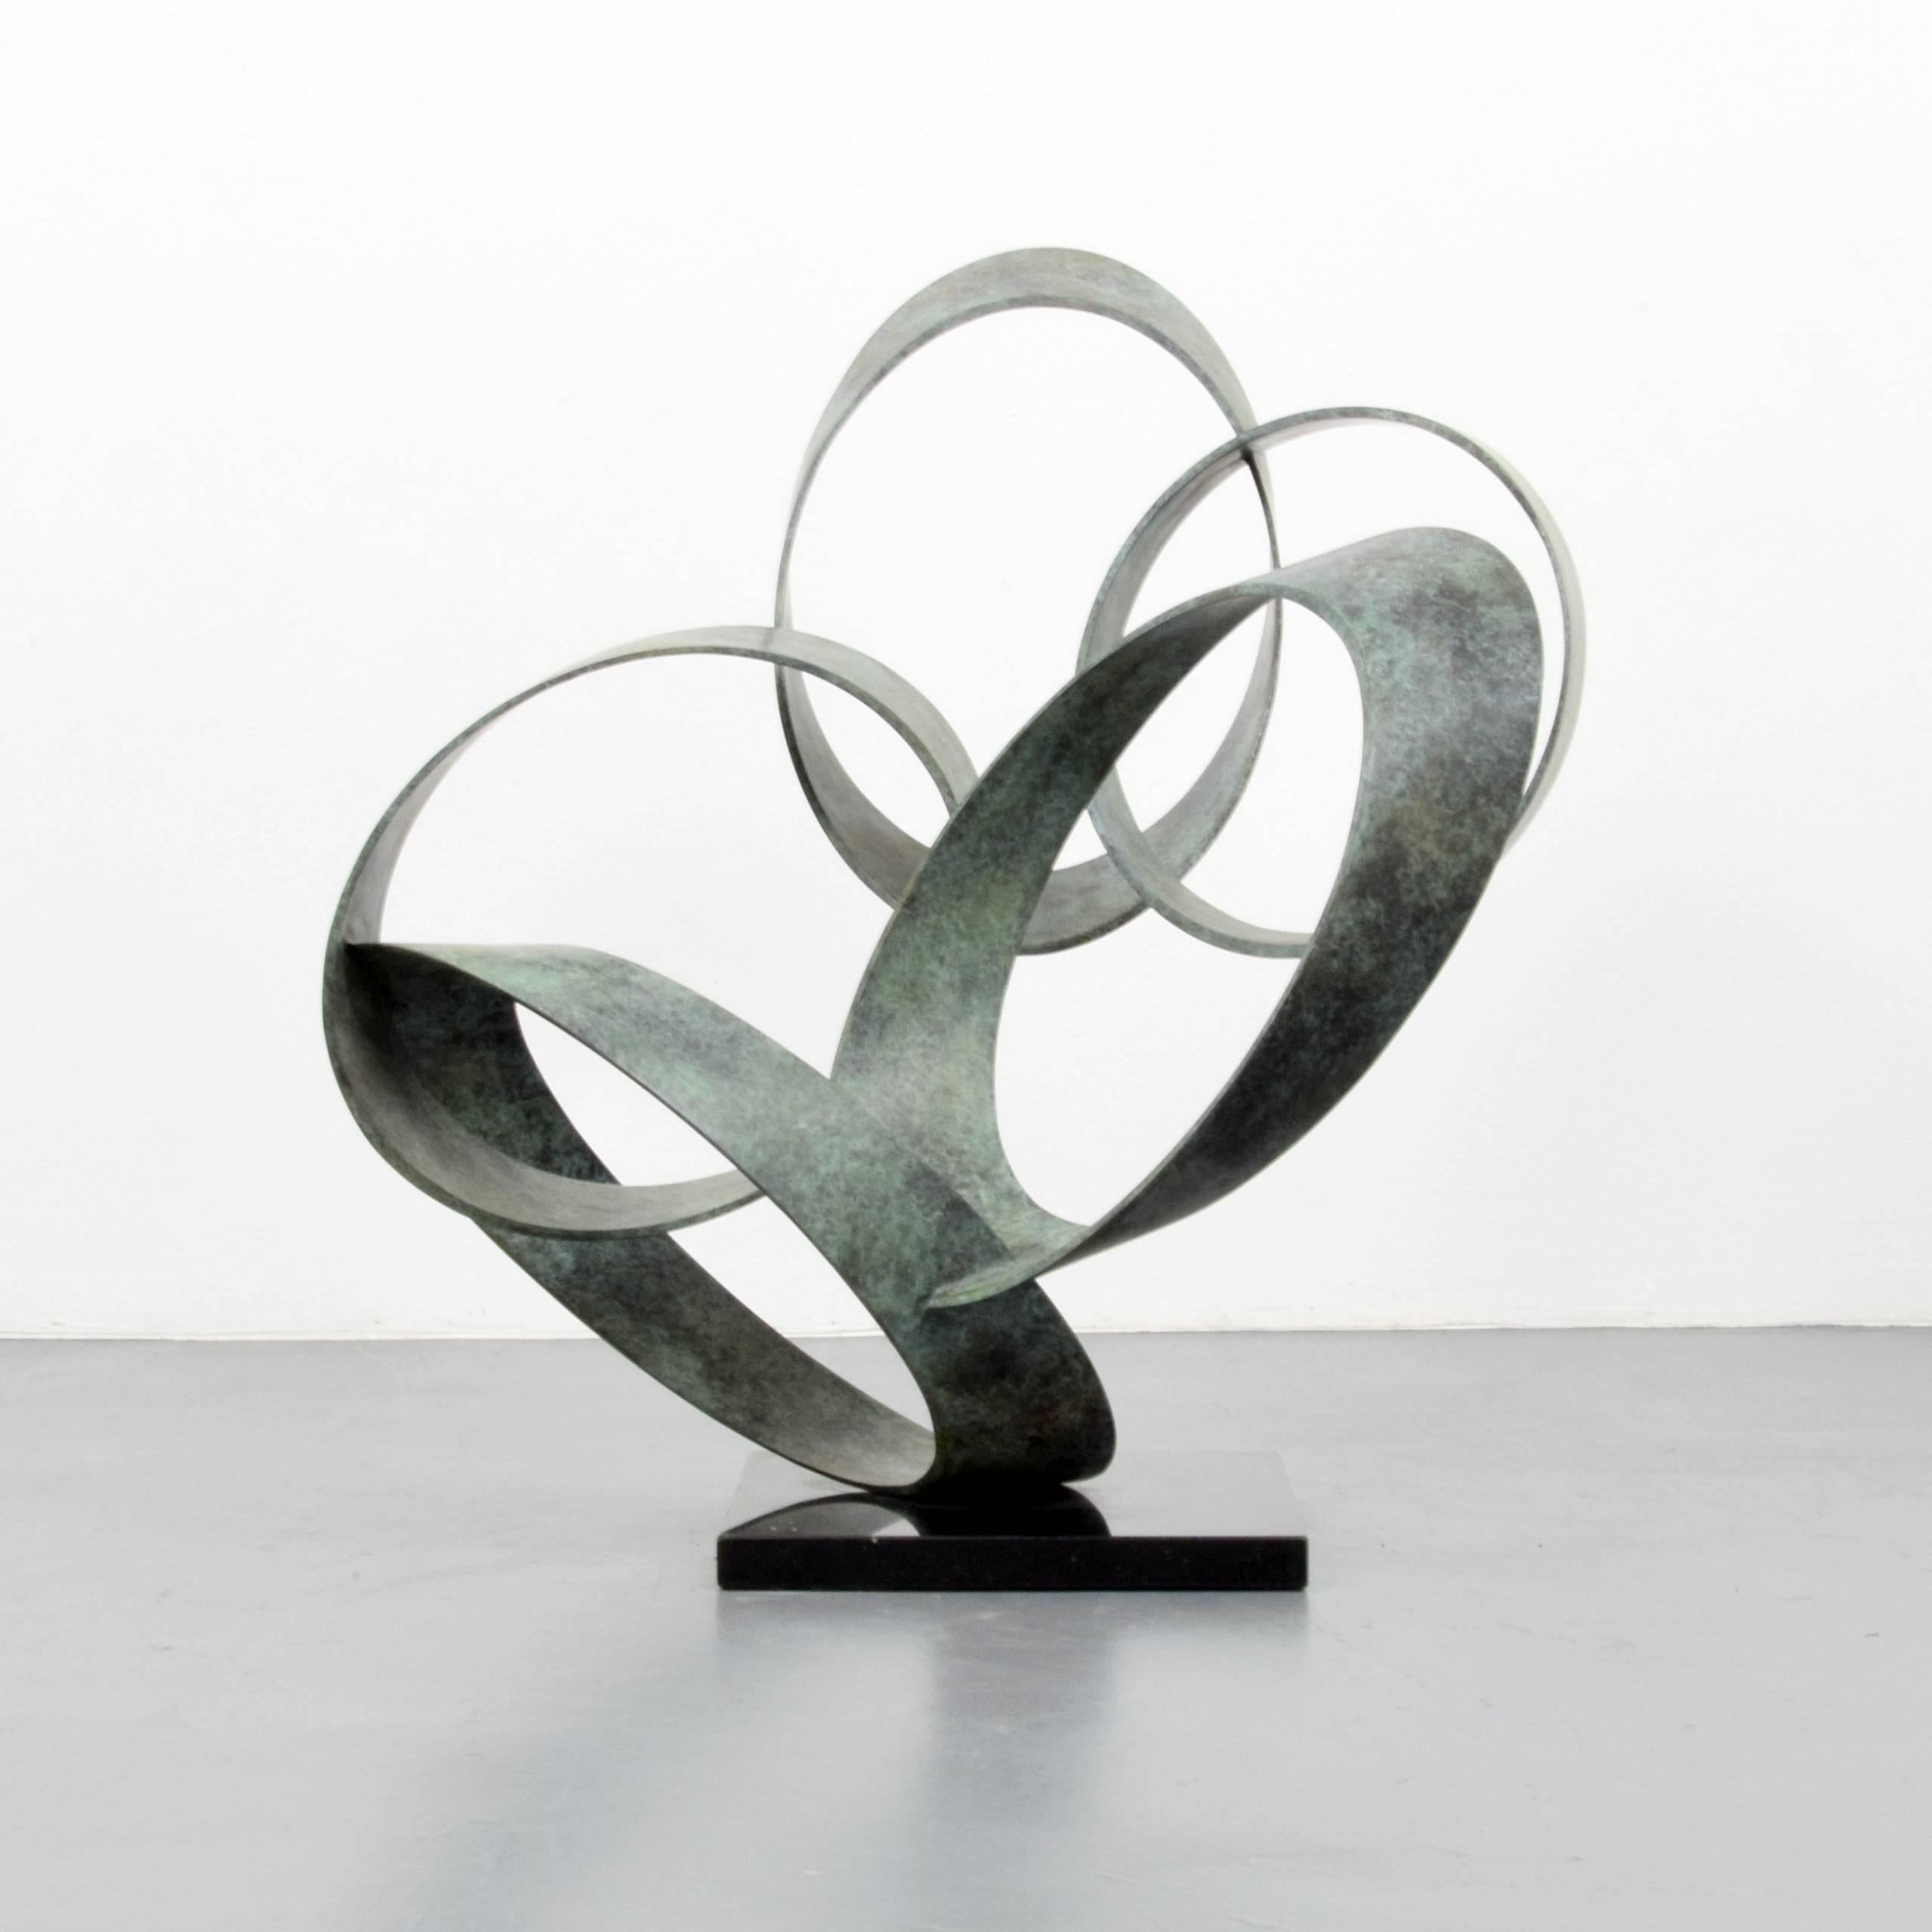 Sculpture is titled ORBITS XIIIA by Larry Mohr (American, 1921-2013). Provenance: Estate of Larry Mohr.

Markings: signed; ed. 1/8

Larry Mohr was an accomplished sculptor whose figural and abstract works are in the collections of the Metropolitan